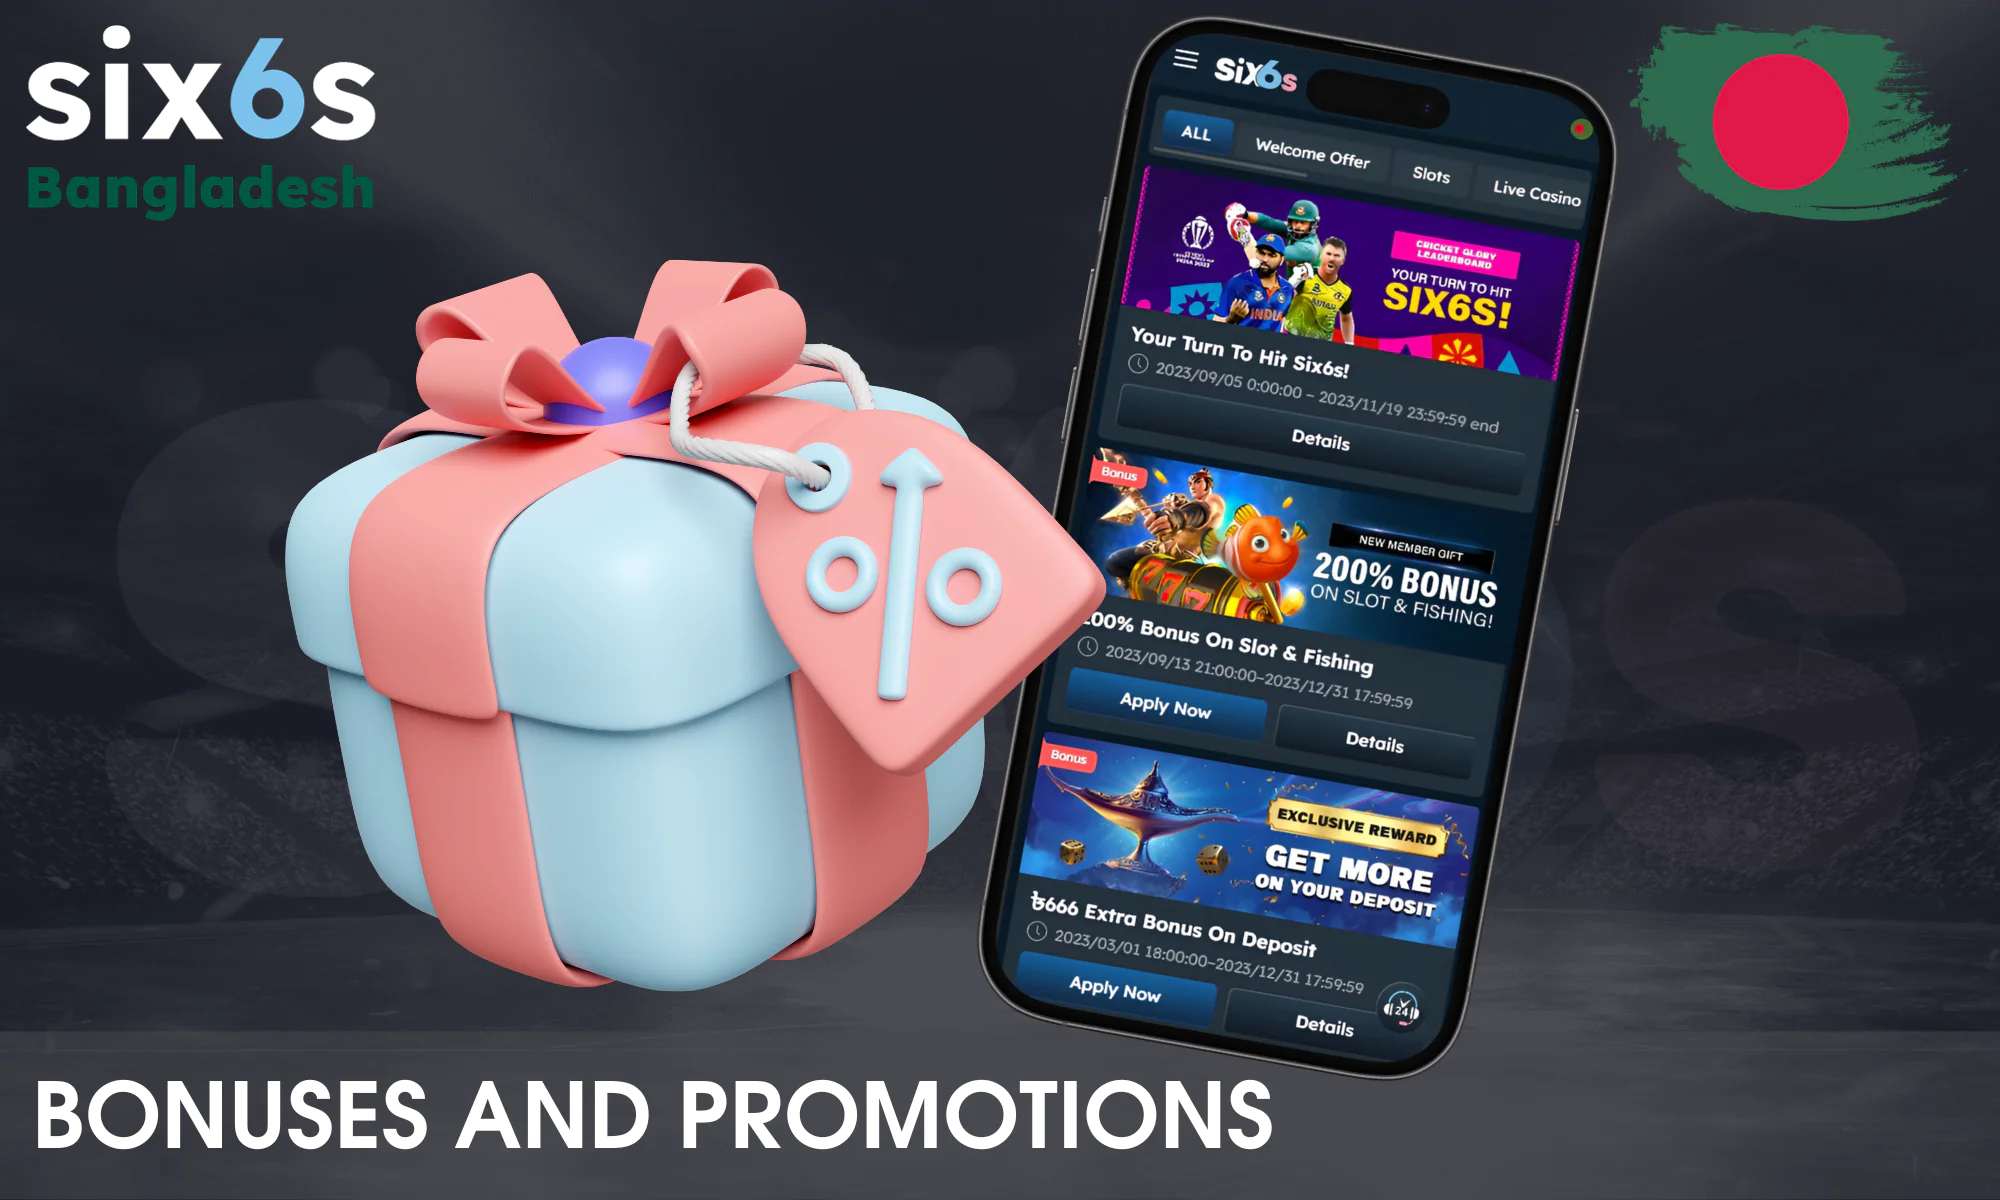 Temporary and permanent promotions and bonuses for Six6s players